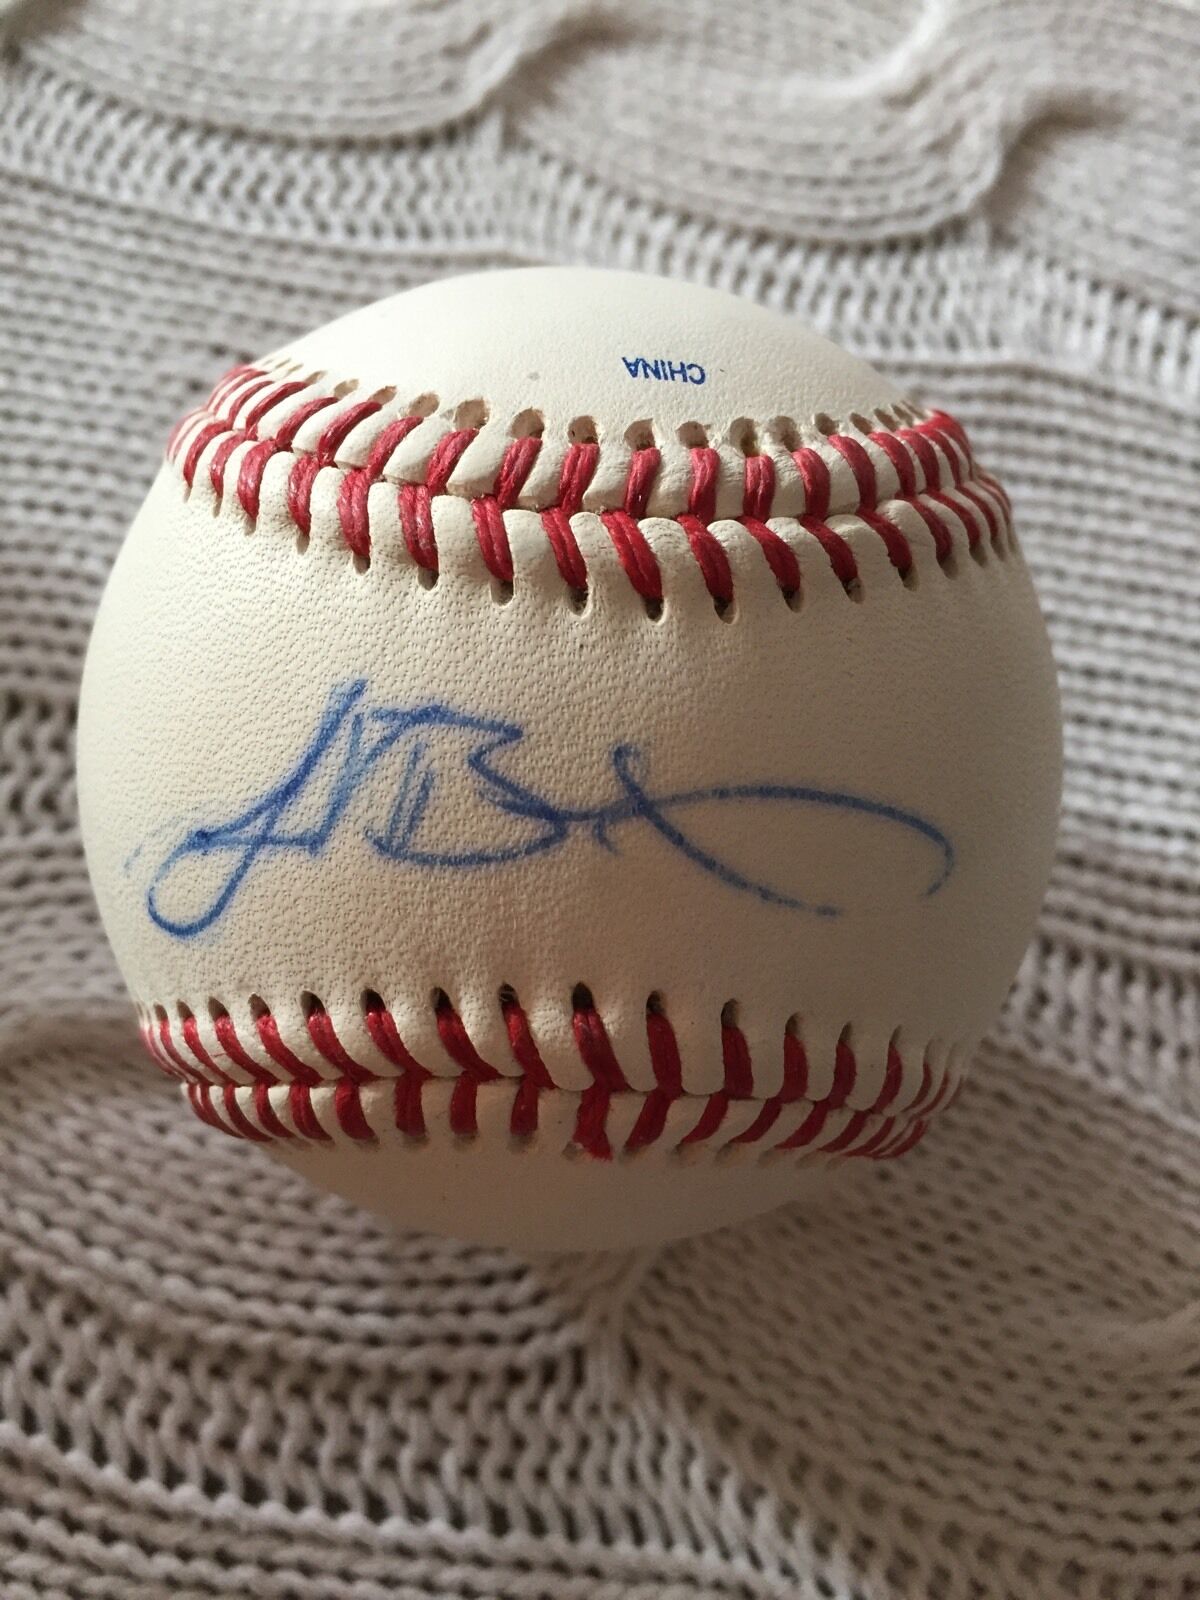 Jeremy Bonderman Signed Baseball Autographed Official League Leather Ball